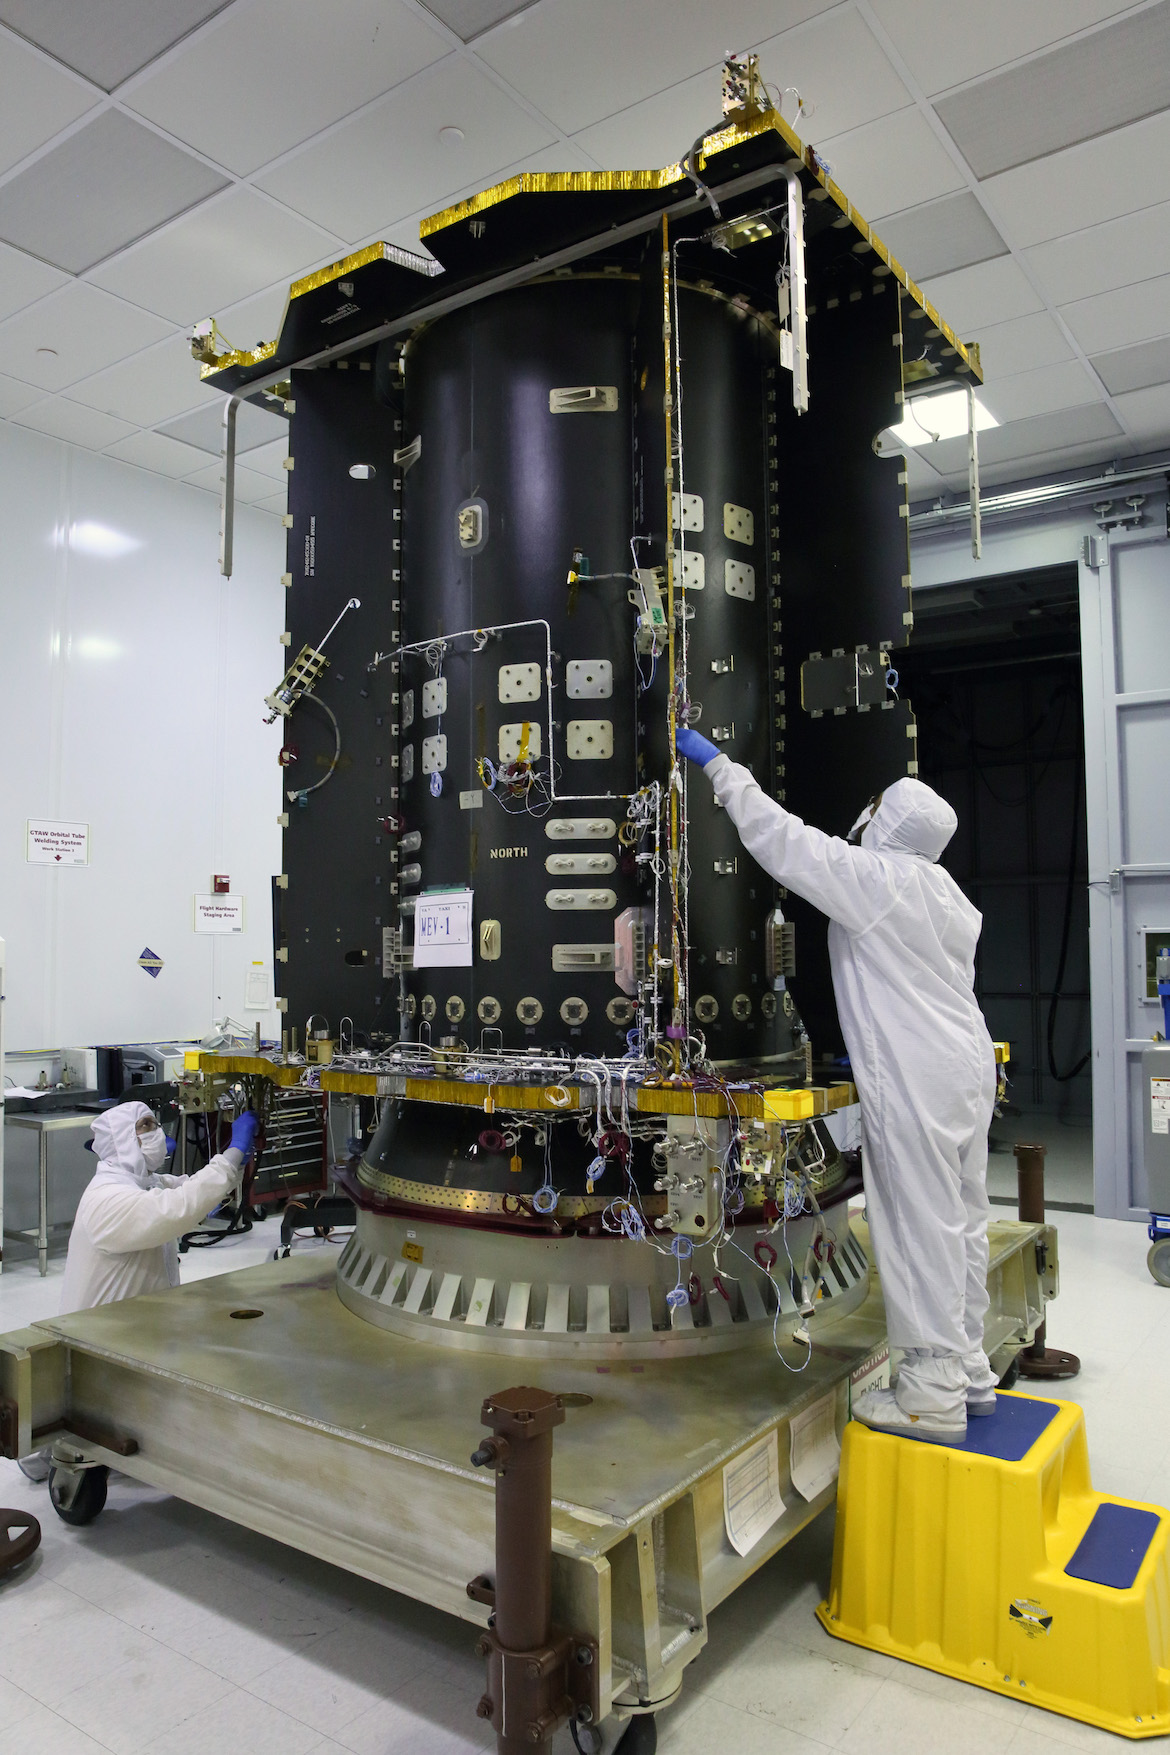 Orbital ATK specialists at work on the core of the MEV. (Northrop Grumman)